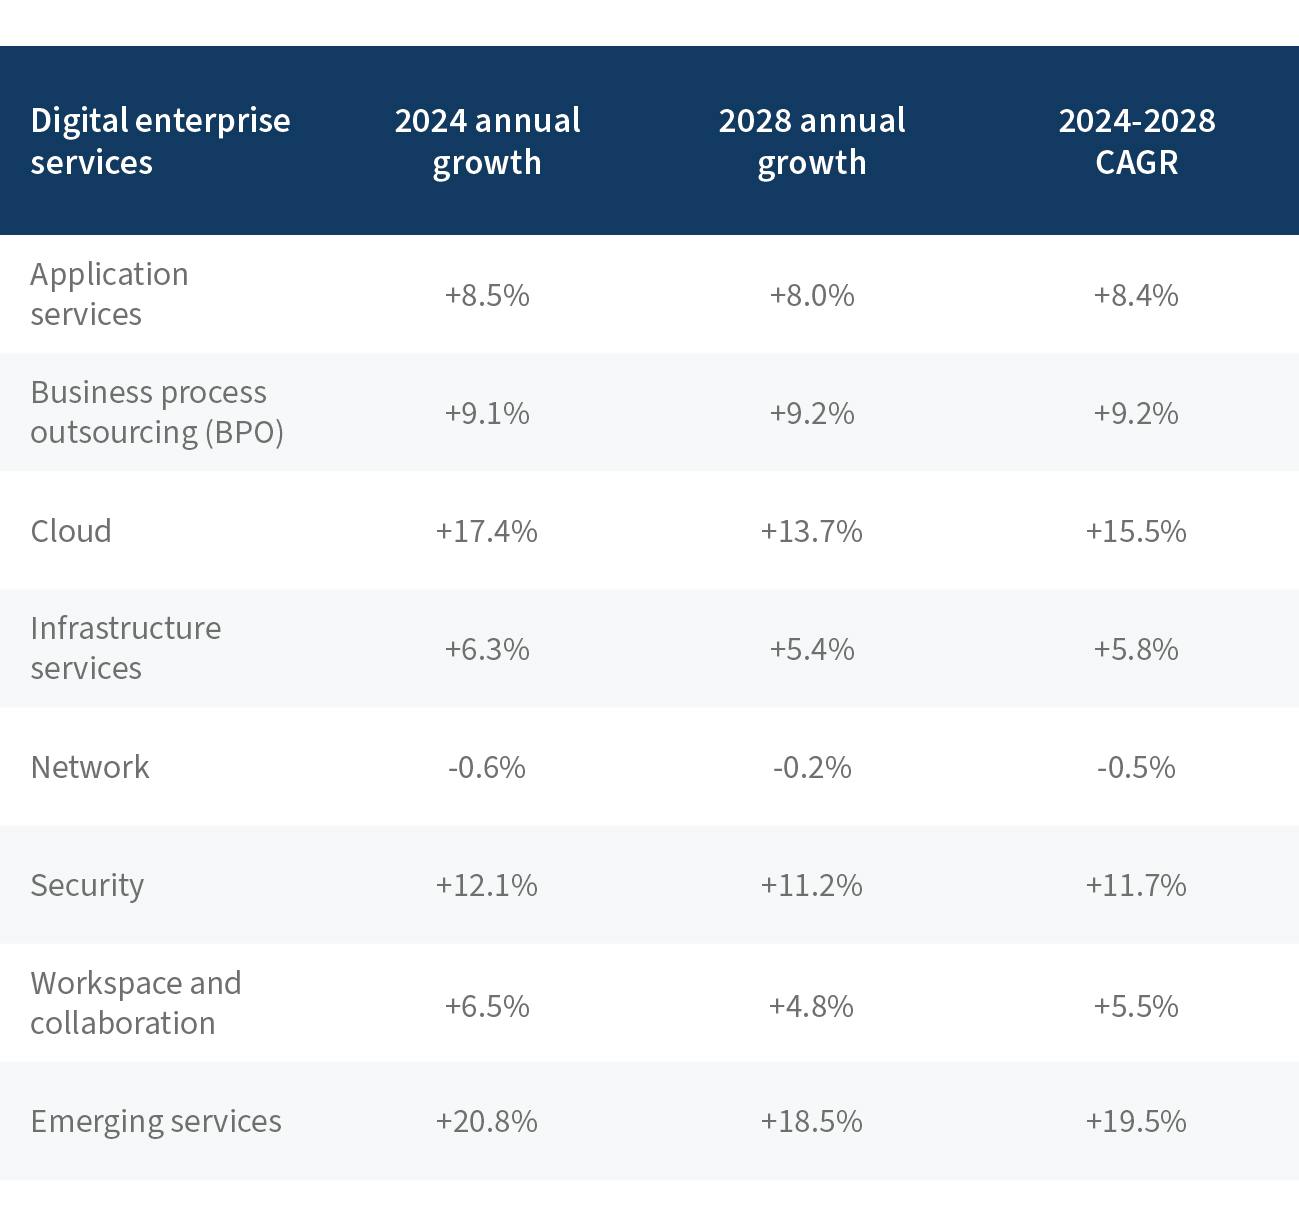 2024-2028 growth rates by service category